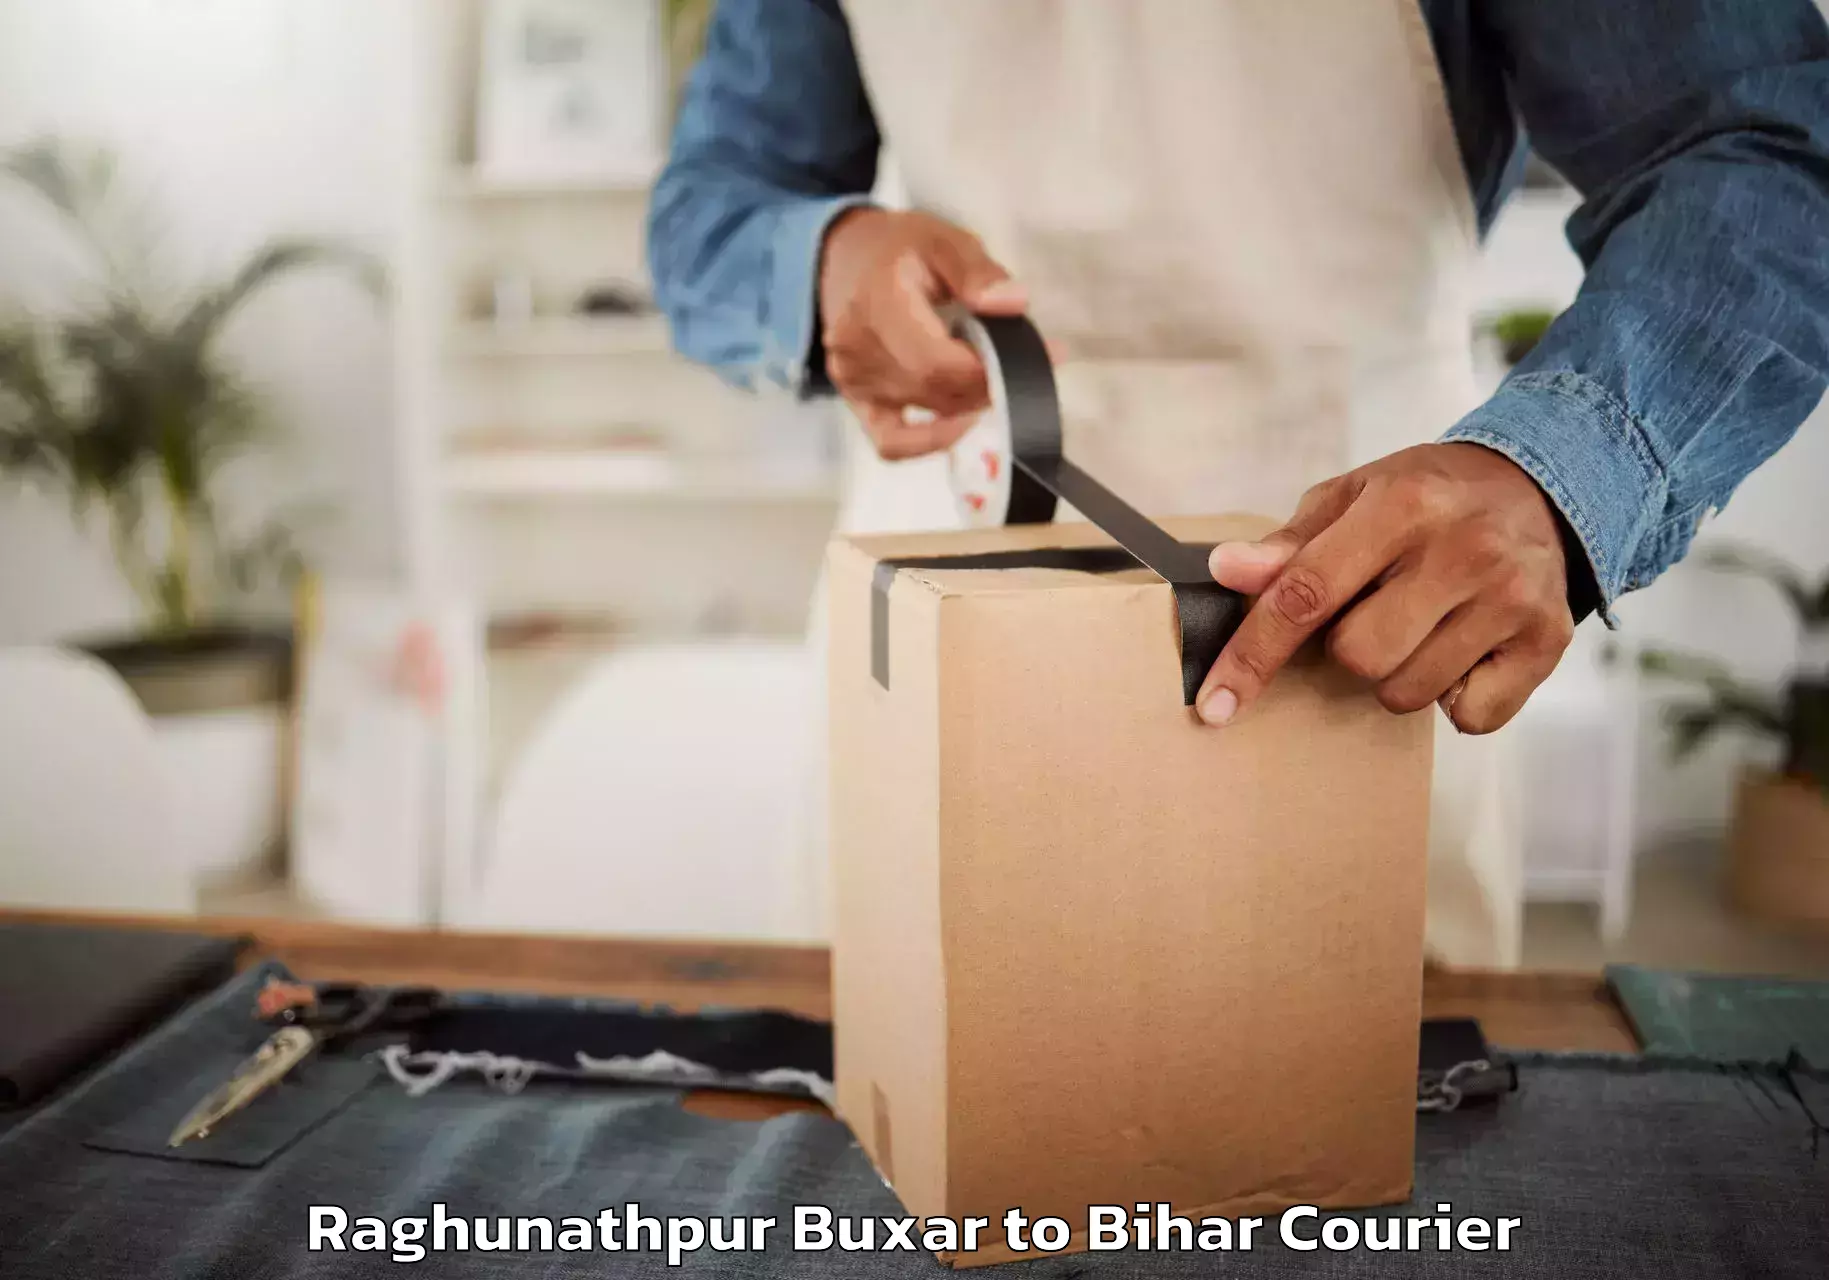 Professional packing and transport in Raghunathpur Buxar to Makhdumpur